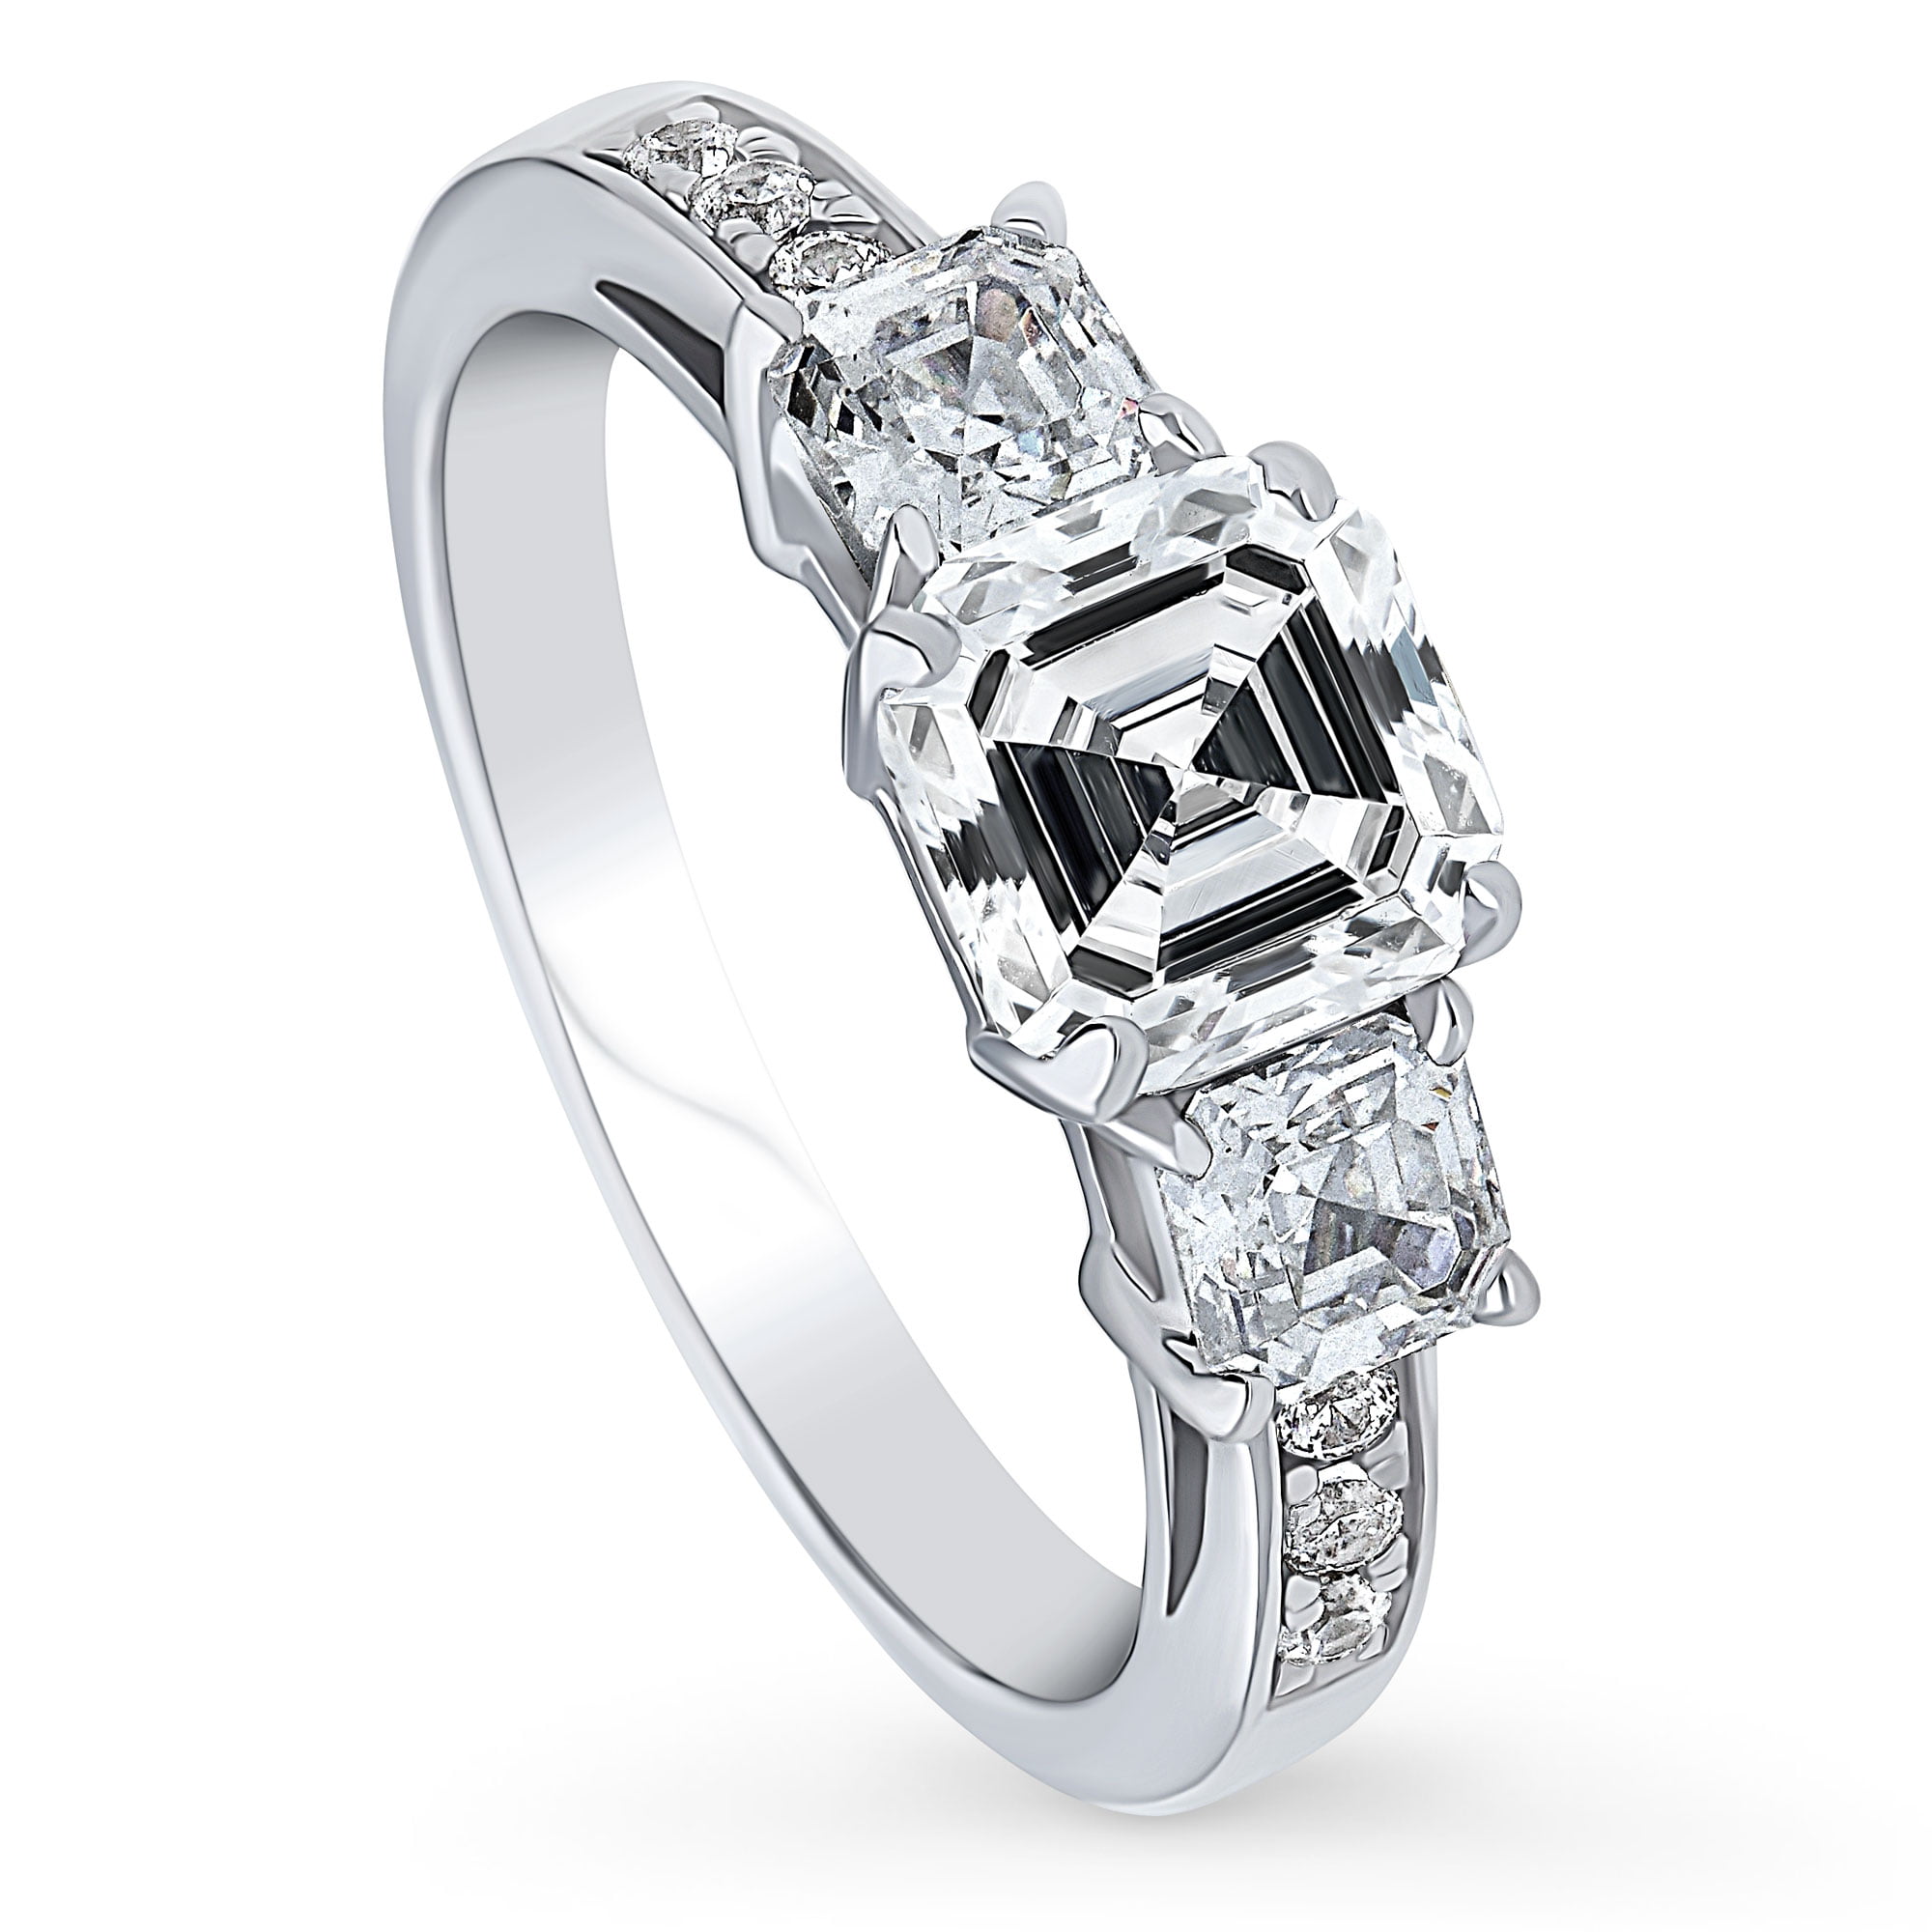 30% OFF RHODIUM PLATED 925 HALLMARKED STERLING SILVER ASSCHER CUT SOLITAIRE RING 